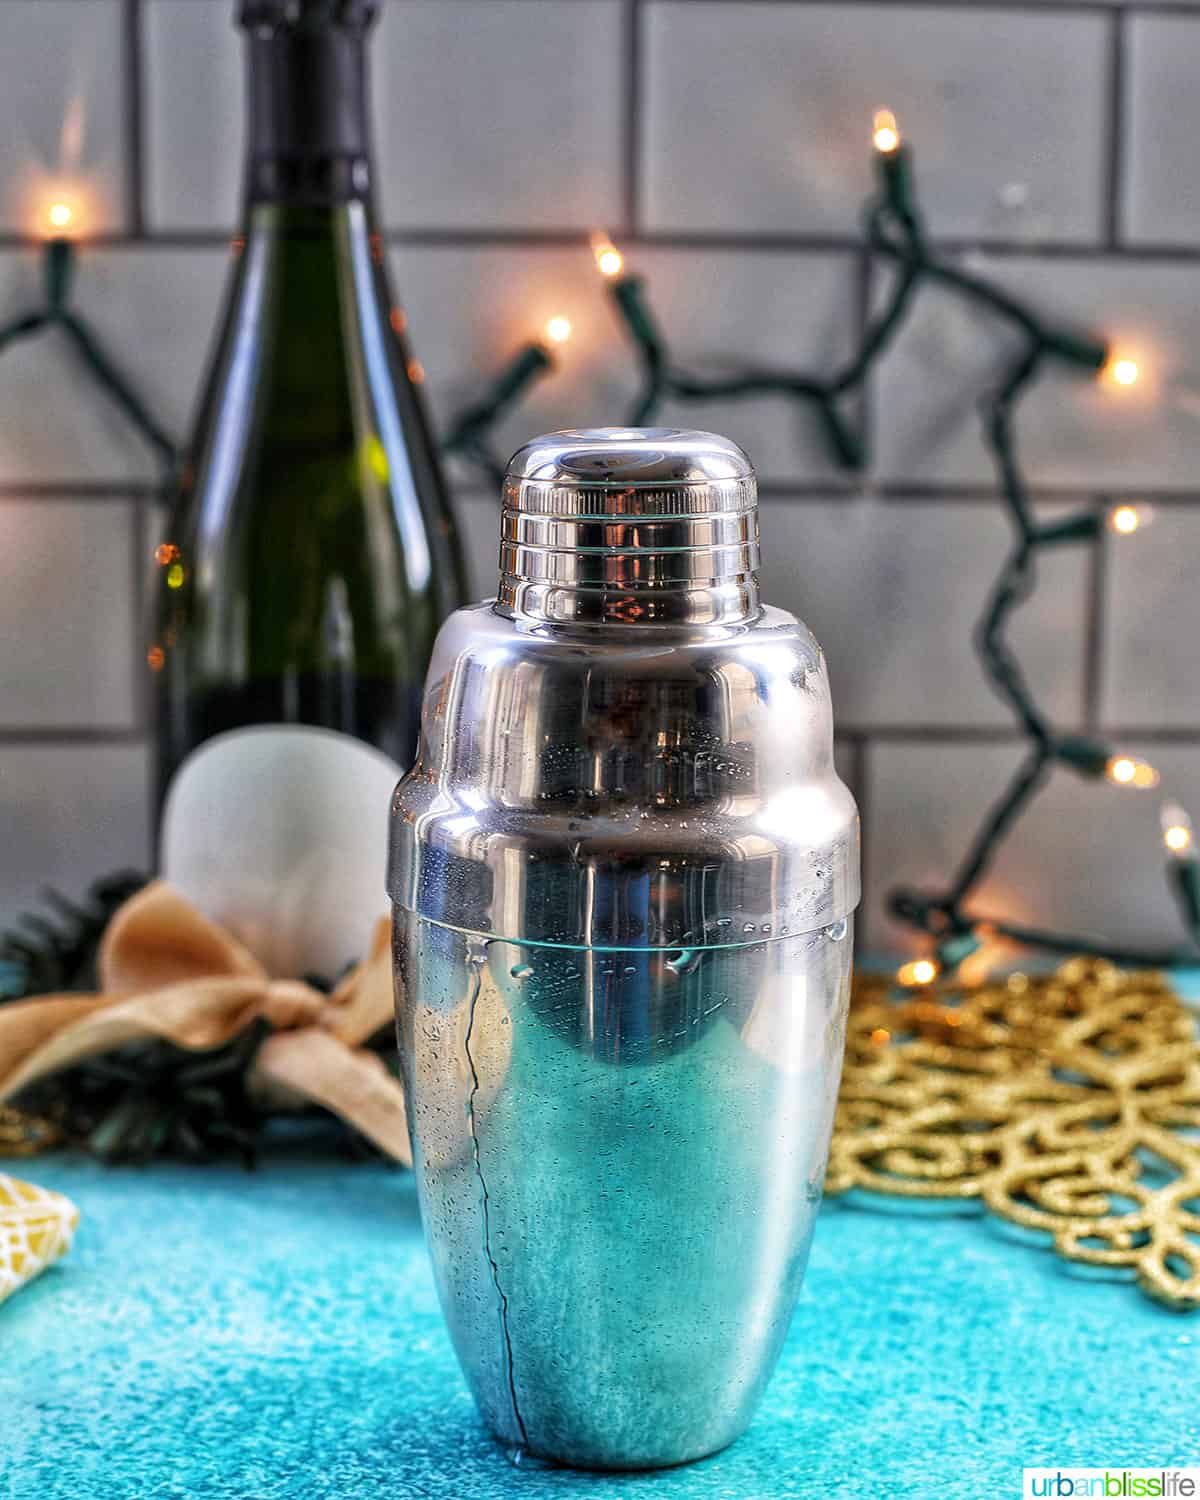 cocktail shaker with champagne and twinkly lights in background and blue table.